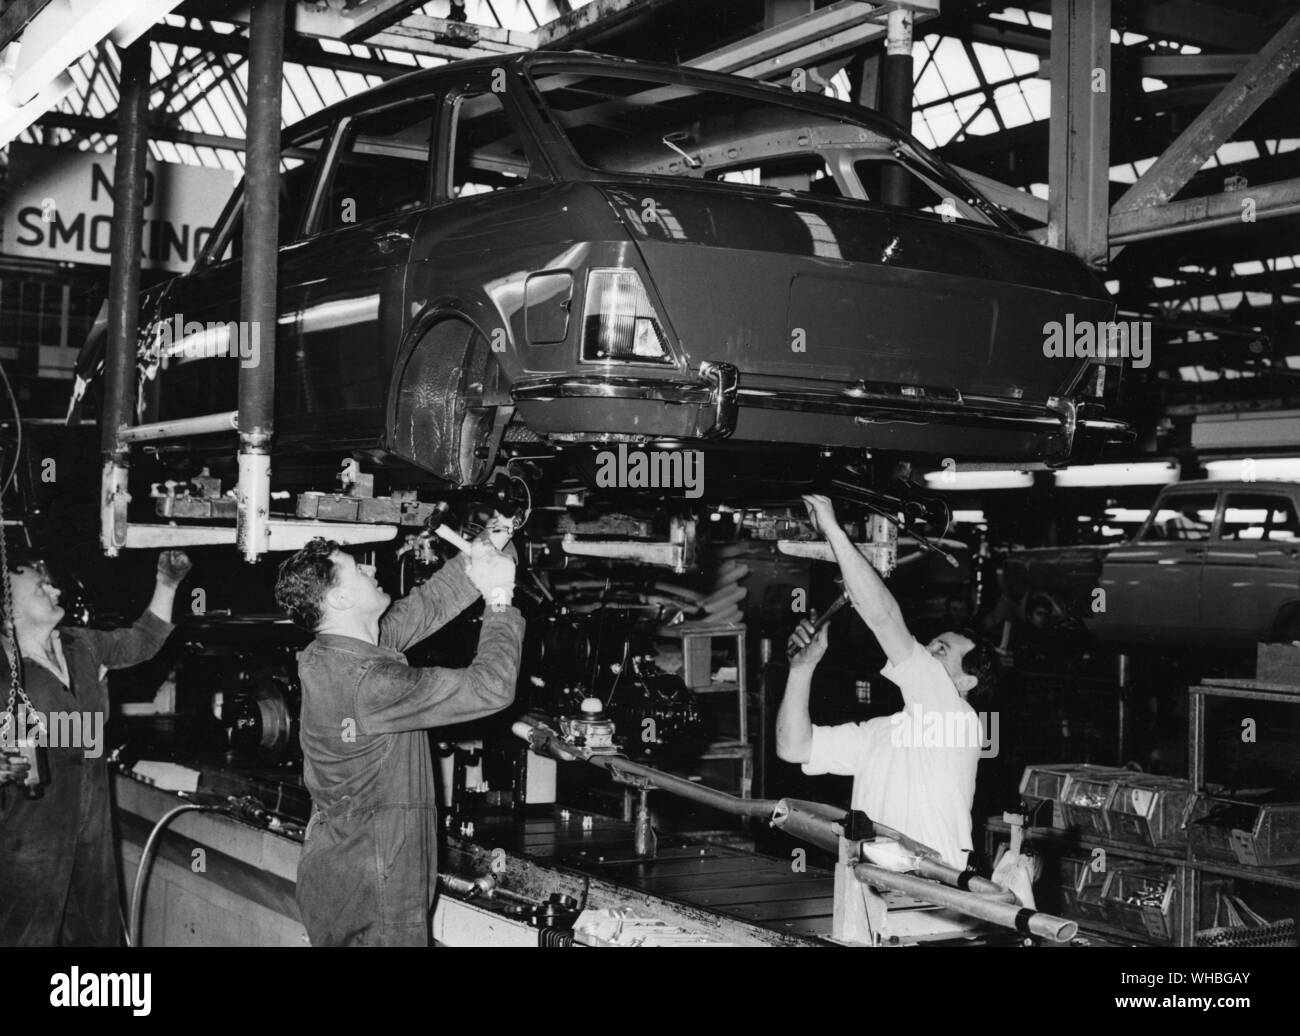 Austin Maxi Production line at Cowley , Oxfordshire , England. 1969 - 1981 Stock Photo